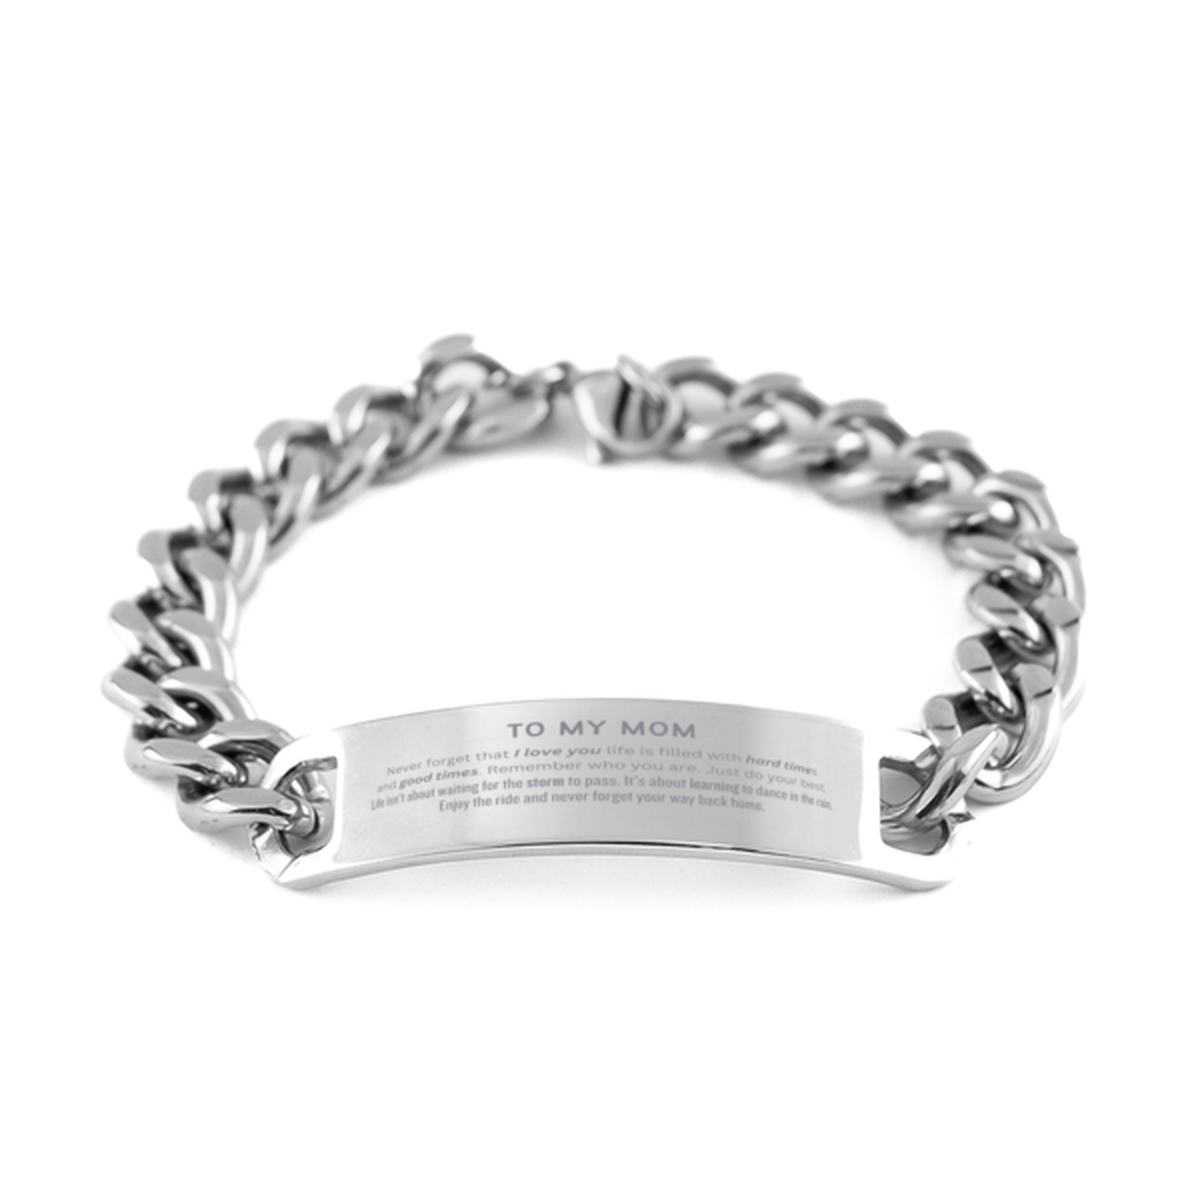 Christmas Mom Cuban Chain Stainless Steel Bracelet Gifts, To My Mom Birthday Thank You Gifts For Mom, Graduation Unique Gifts For Mom To My Mom Never forget that I love you life is filled with hard times and good times. Remember who you are. Just do your